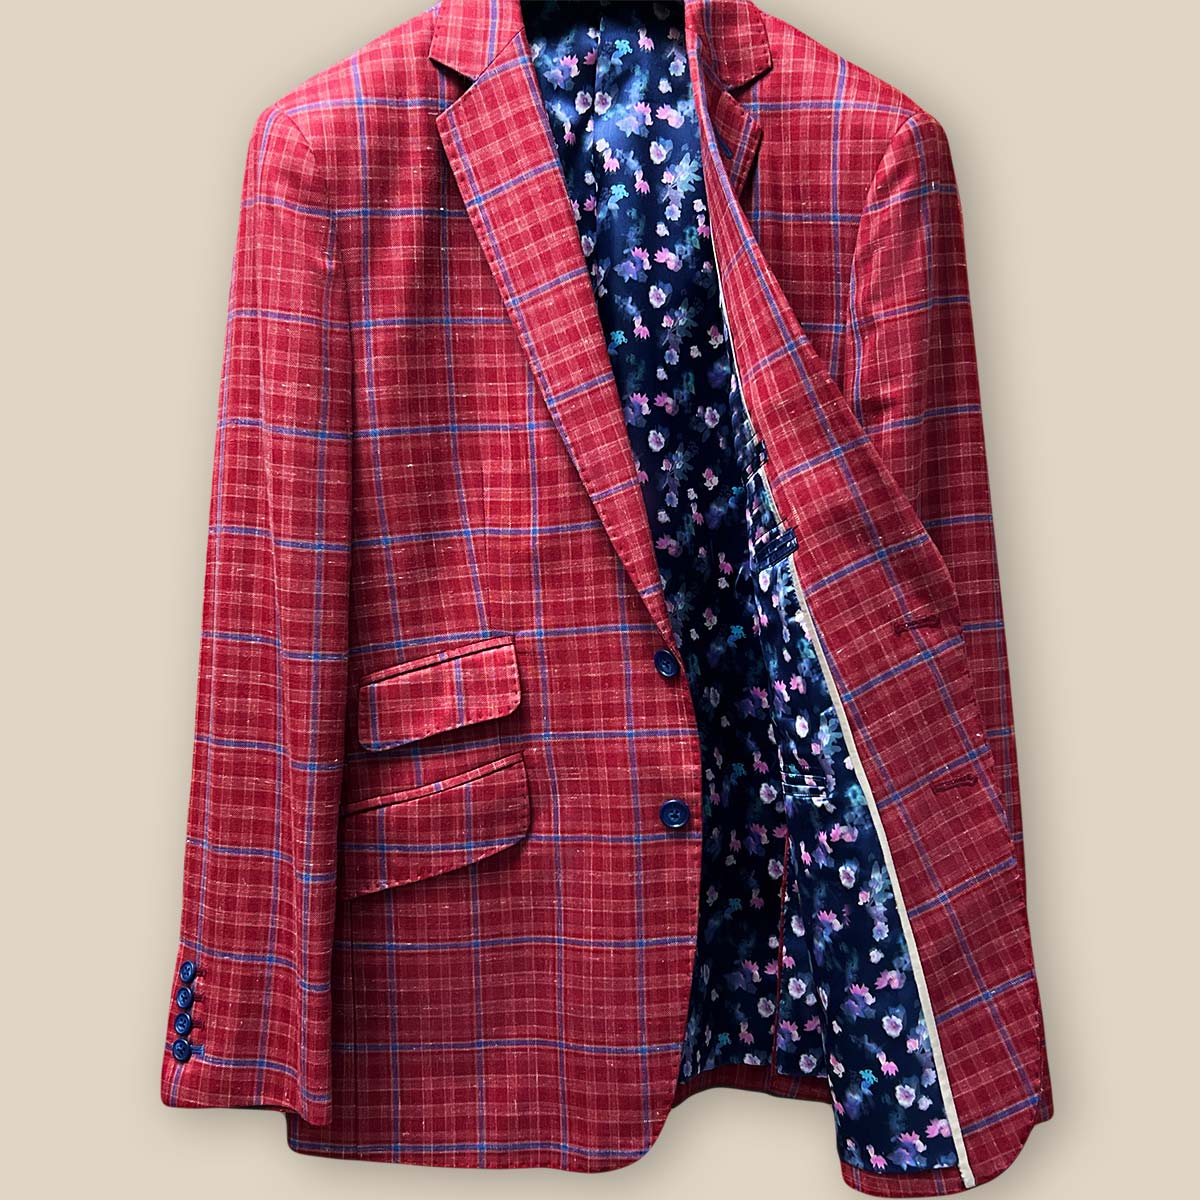 Inside left view of the sport coat, highlighting the navy lining with pink and blue floral accents.